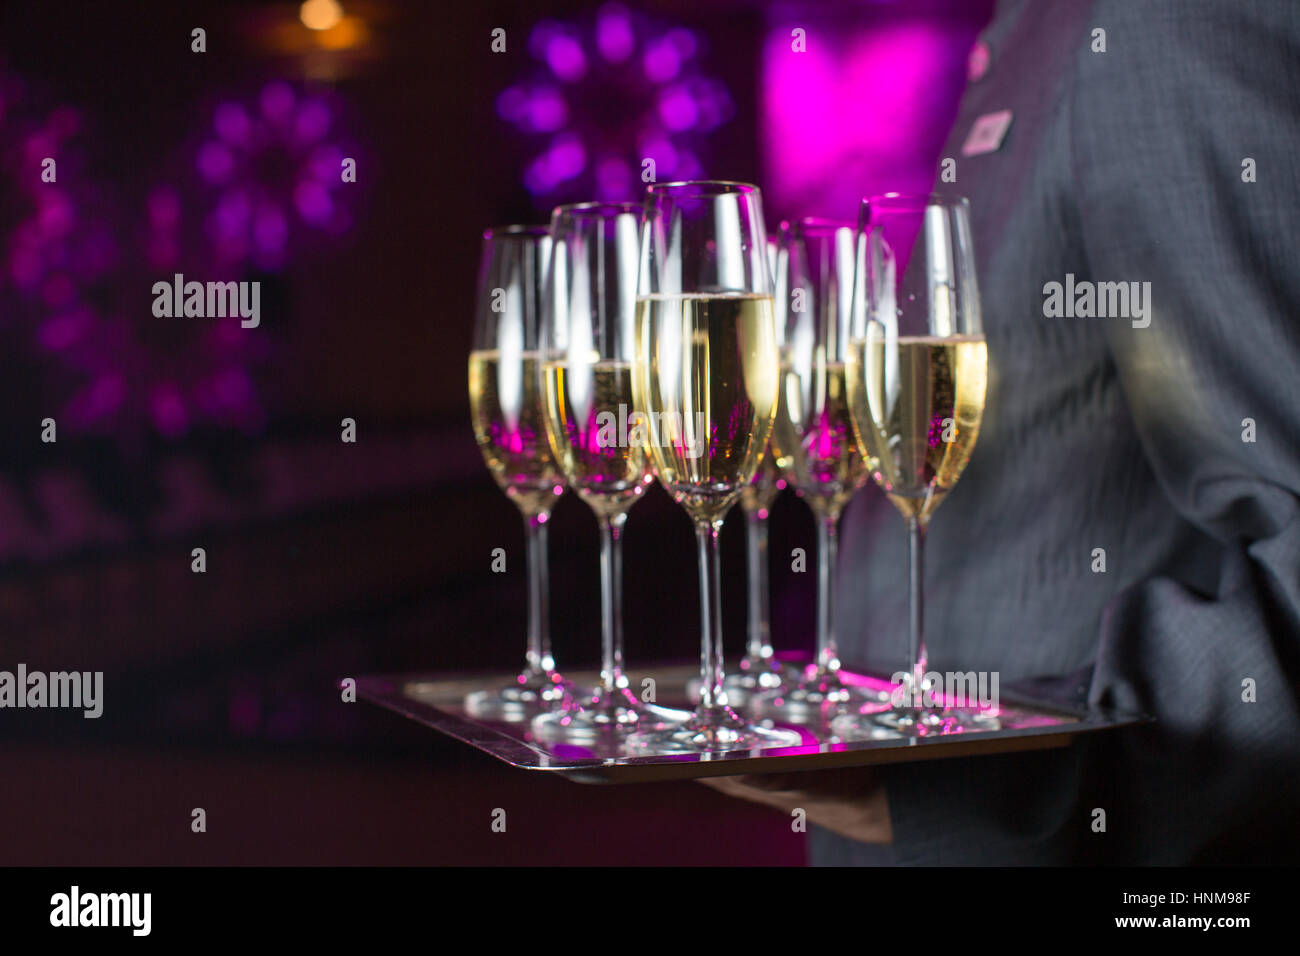 Waiter serving champagne on a tray Stock Photo